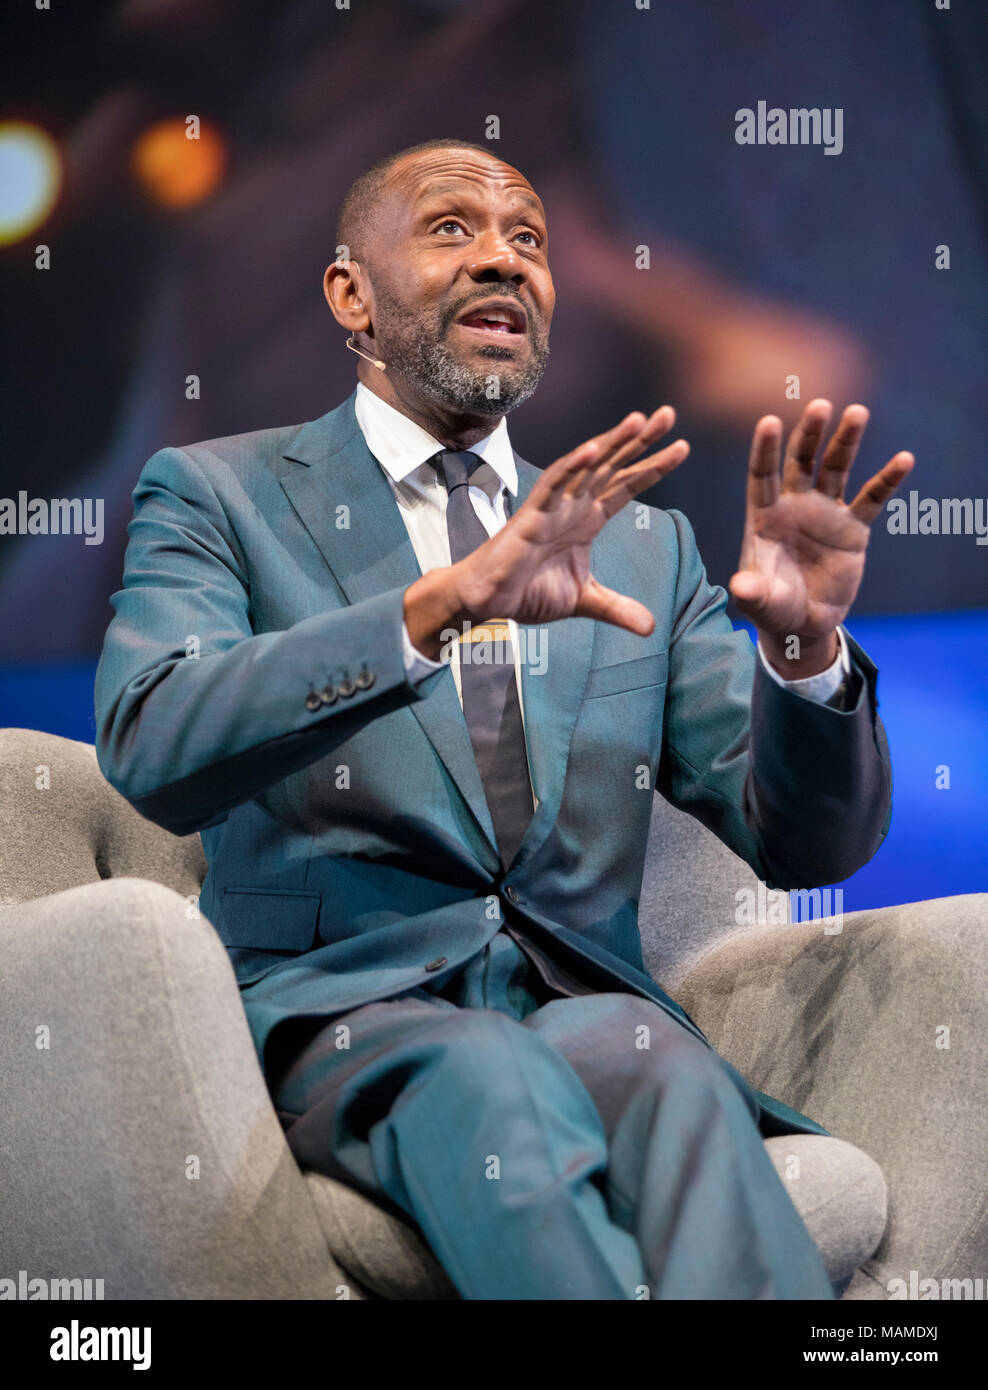 British comedian, writer and actor Sir Lenny Henry calls for tax breaks to increase diversity in TV. MIPCOM Oct. 18 2017, Cannes, France Stock Photo